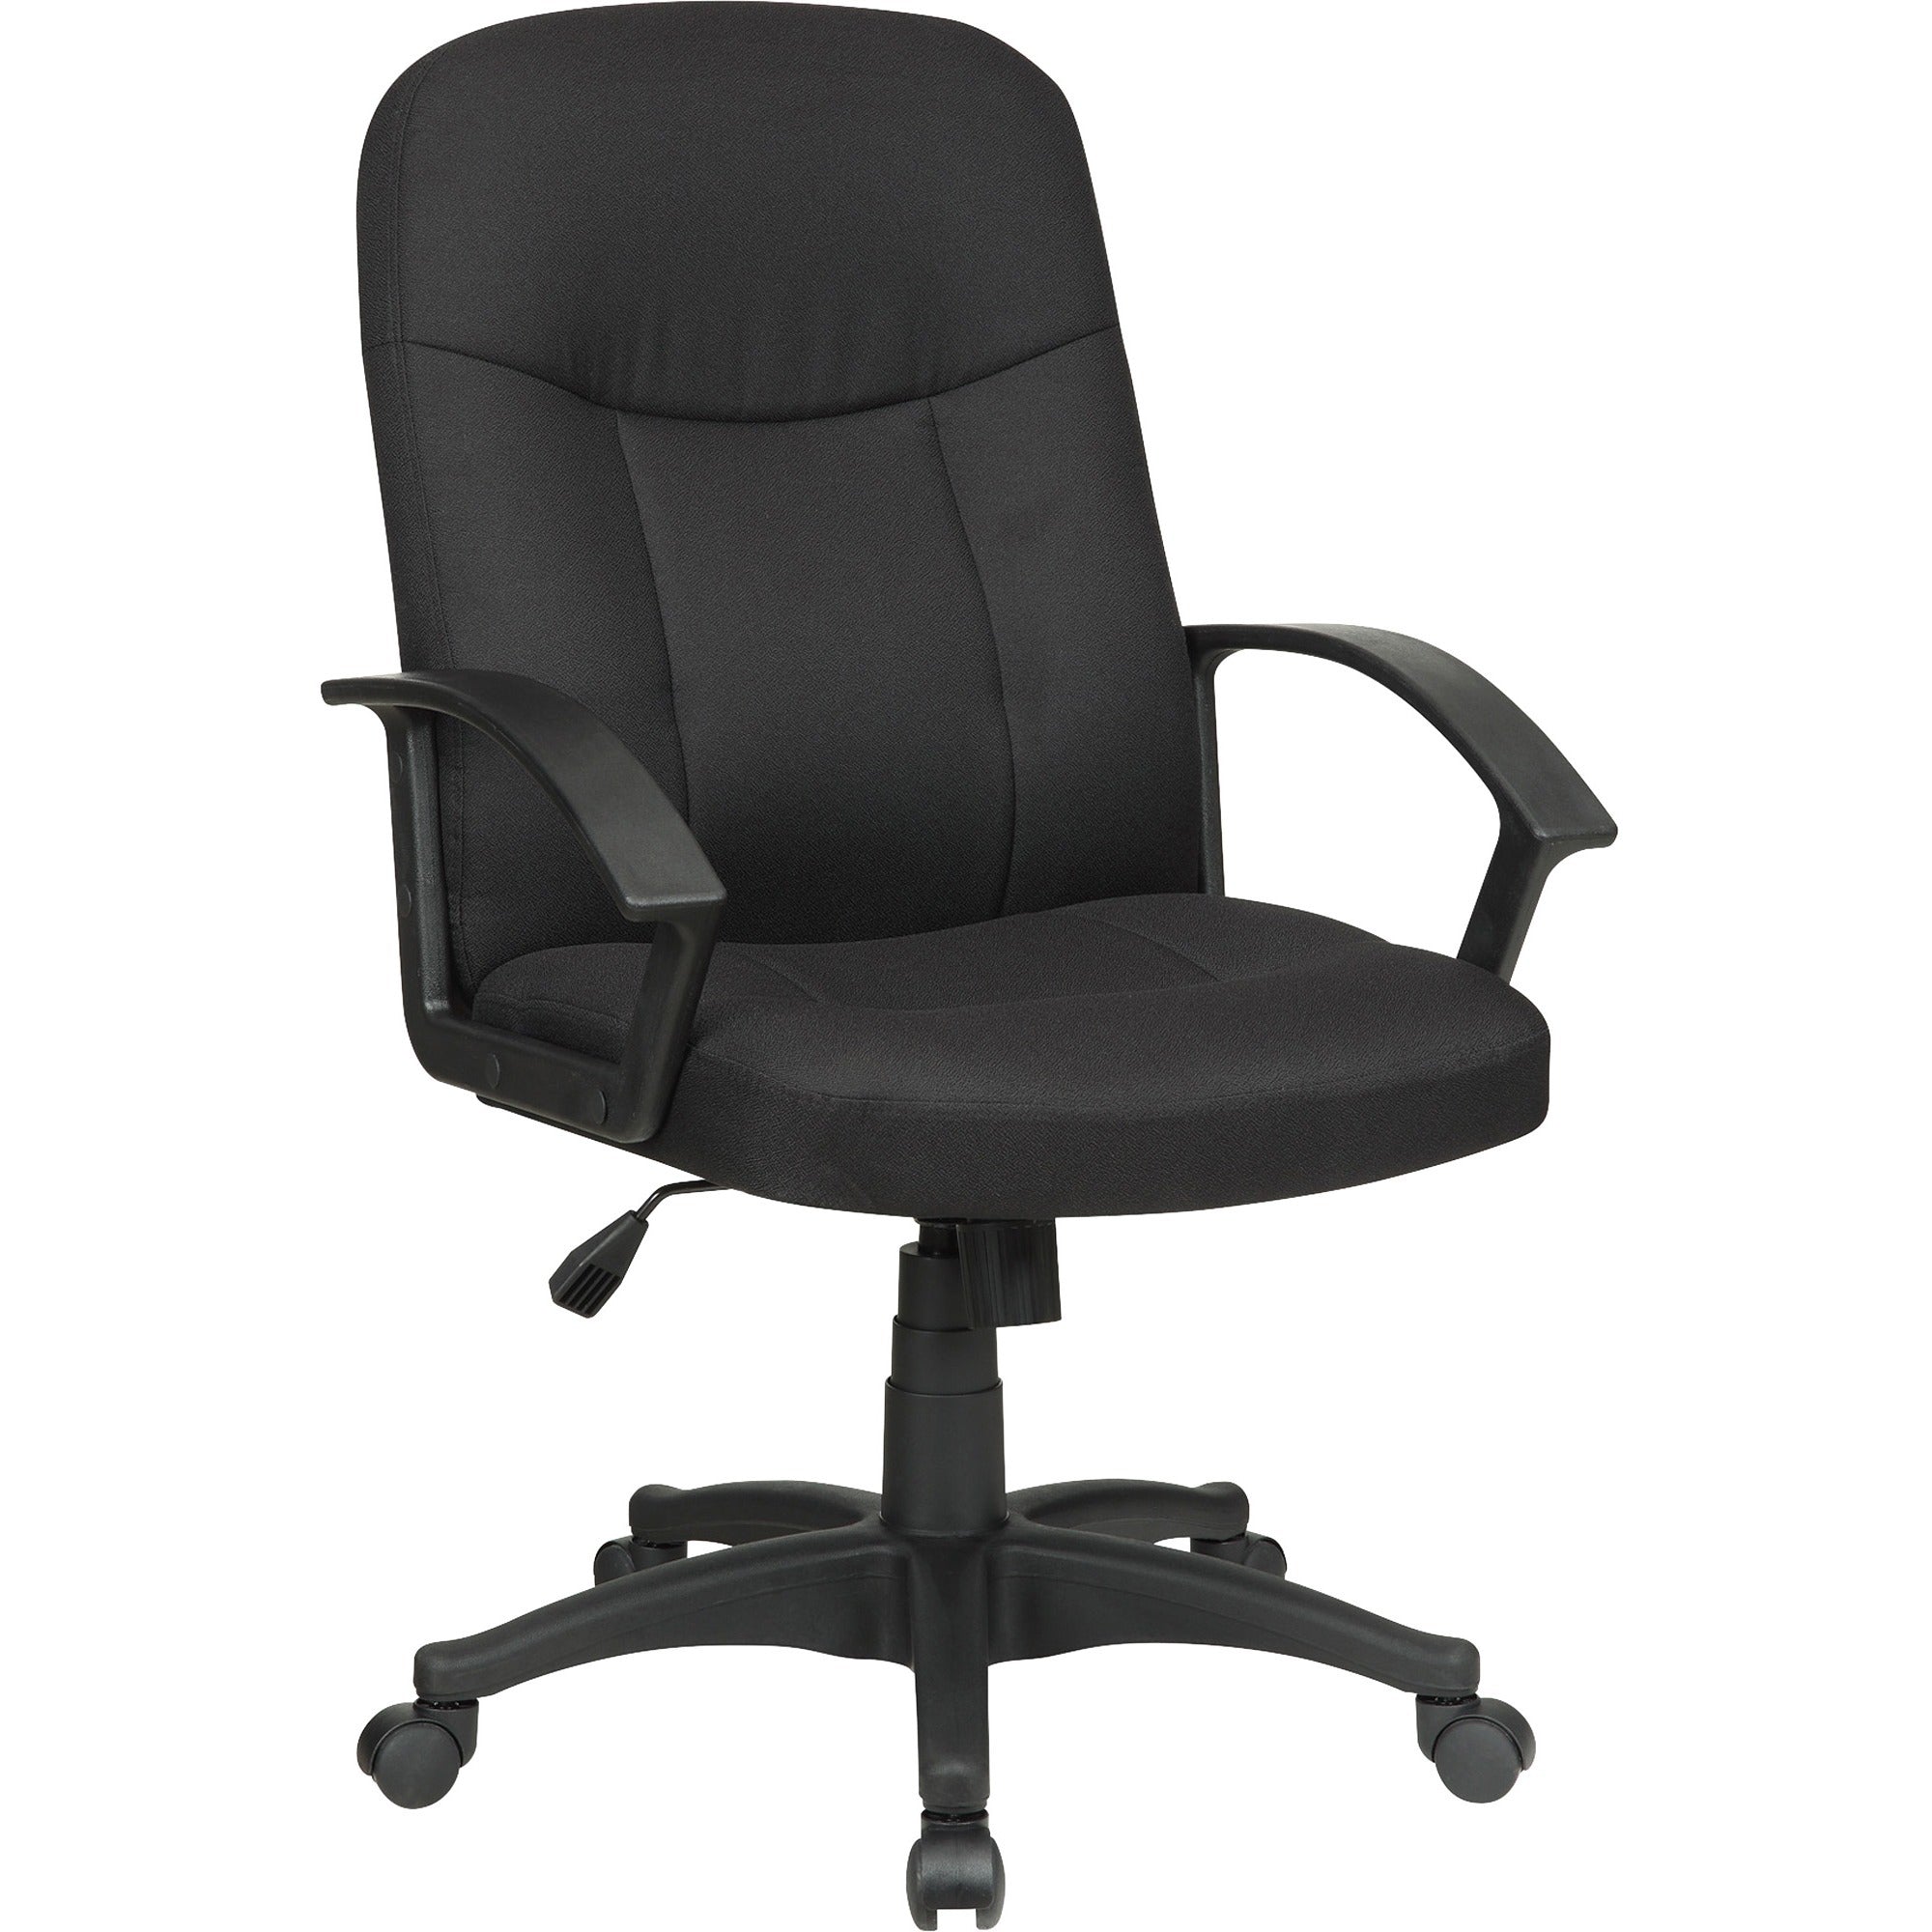 Lorell Executive Upholstered Mid-Back Chair - Black Fabric Seat - Black Fabric Back - Black Frame - 5-star Base - 1 Each - 